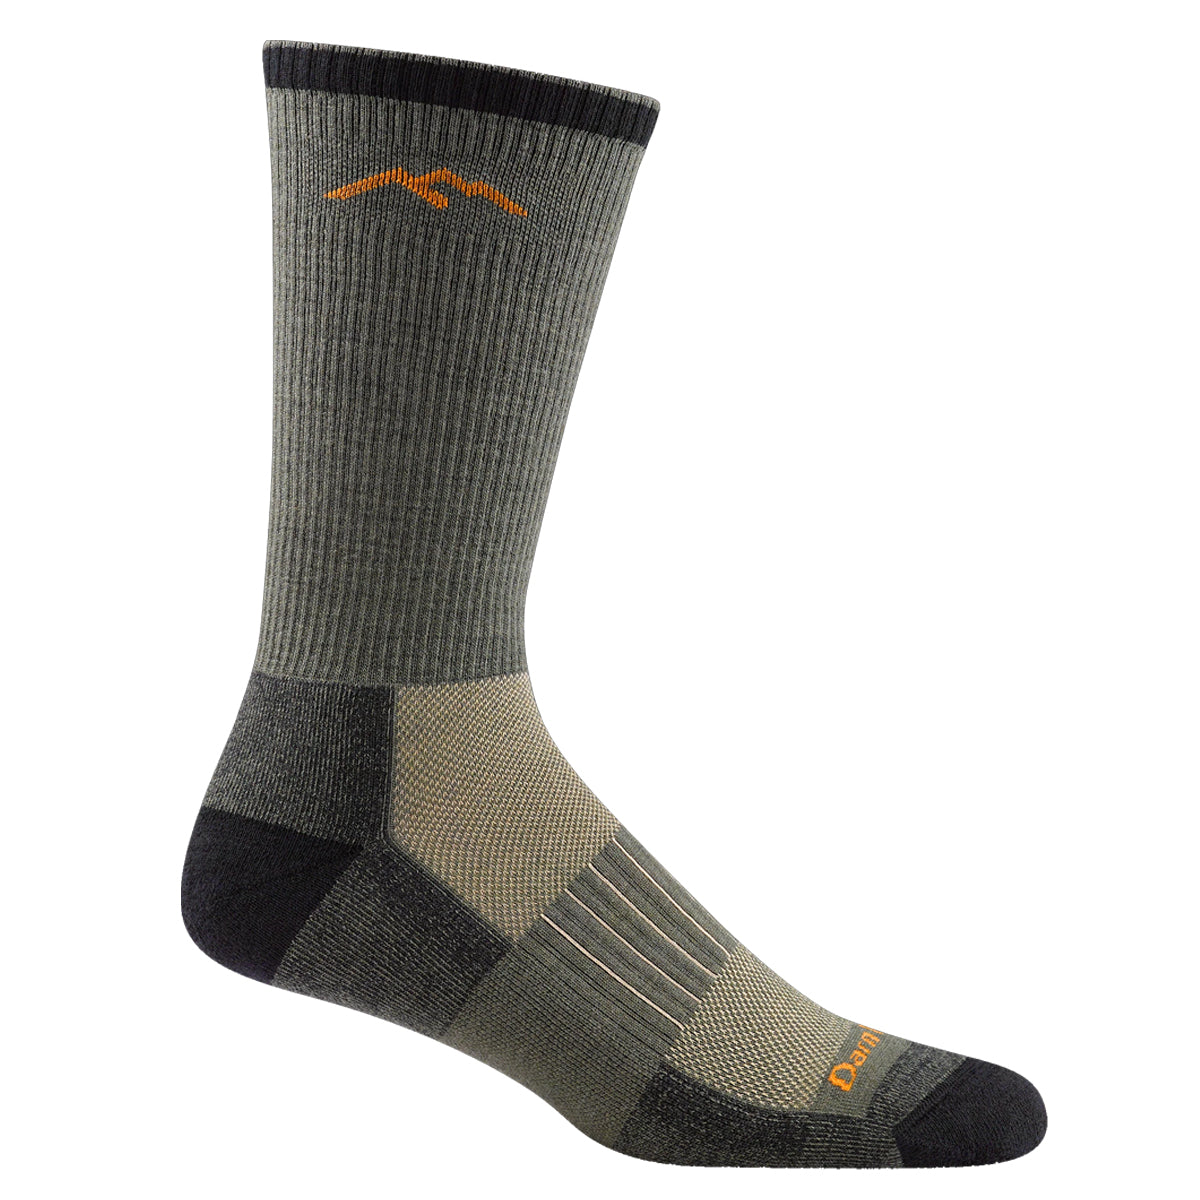 Darn Tough 2100 Men's Boot Lightweight Hunting Sock in  by GOHUNT | Darn Tough Vermont - GOHUNT Shop